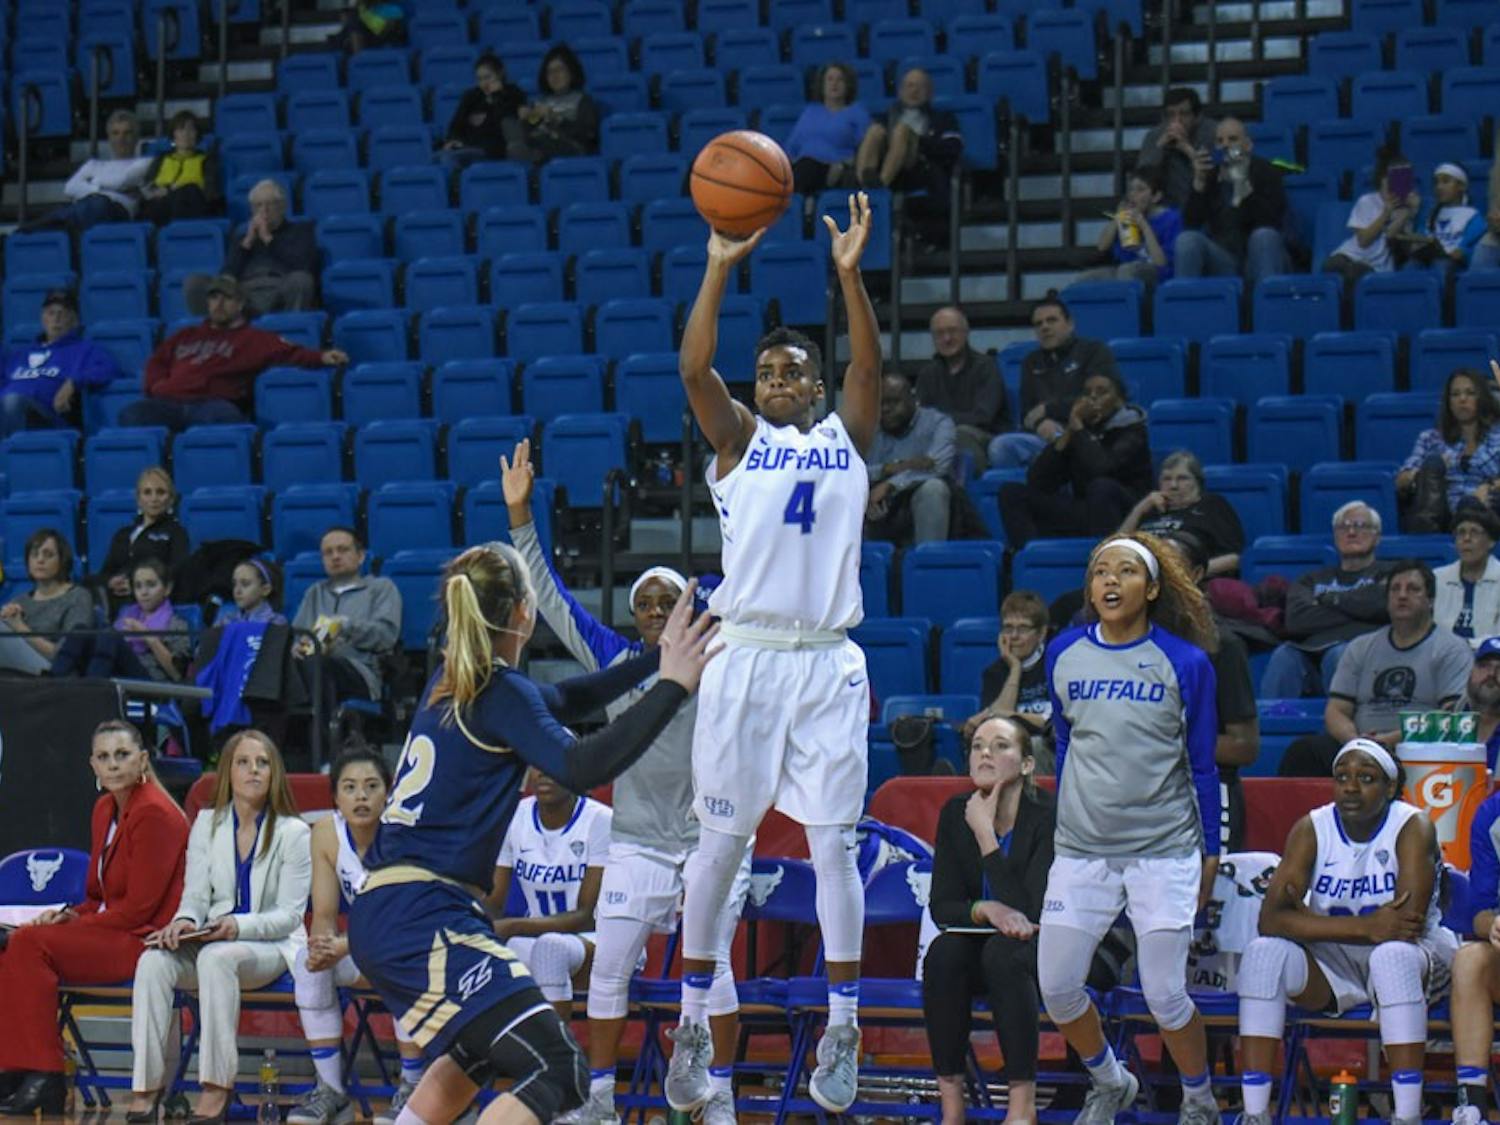 Senior guard Joanna Smith takes a shot. The Bulls now advance to the quarter-finals of the MAC Tournament.